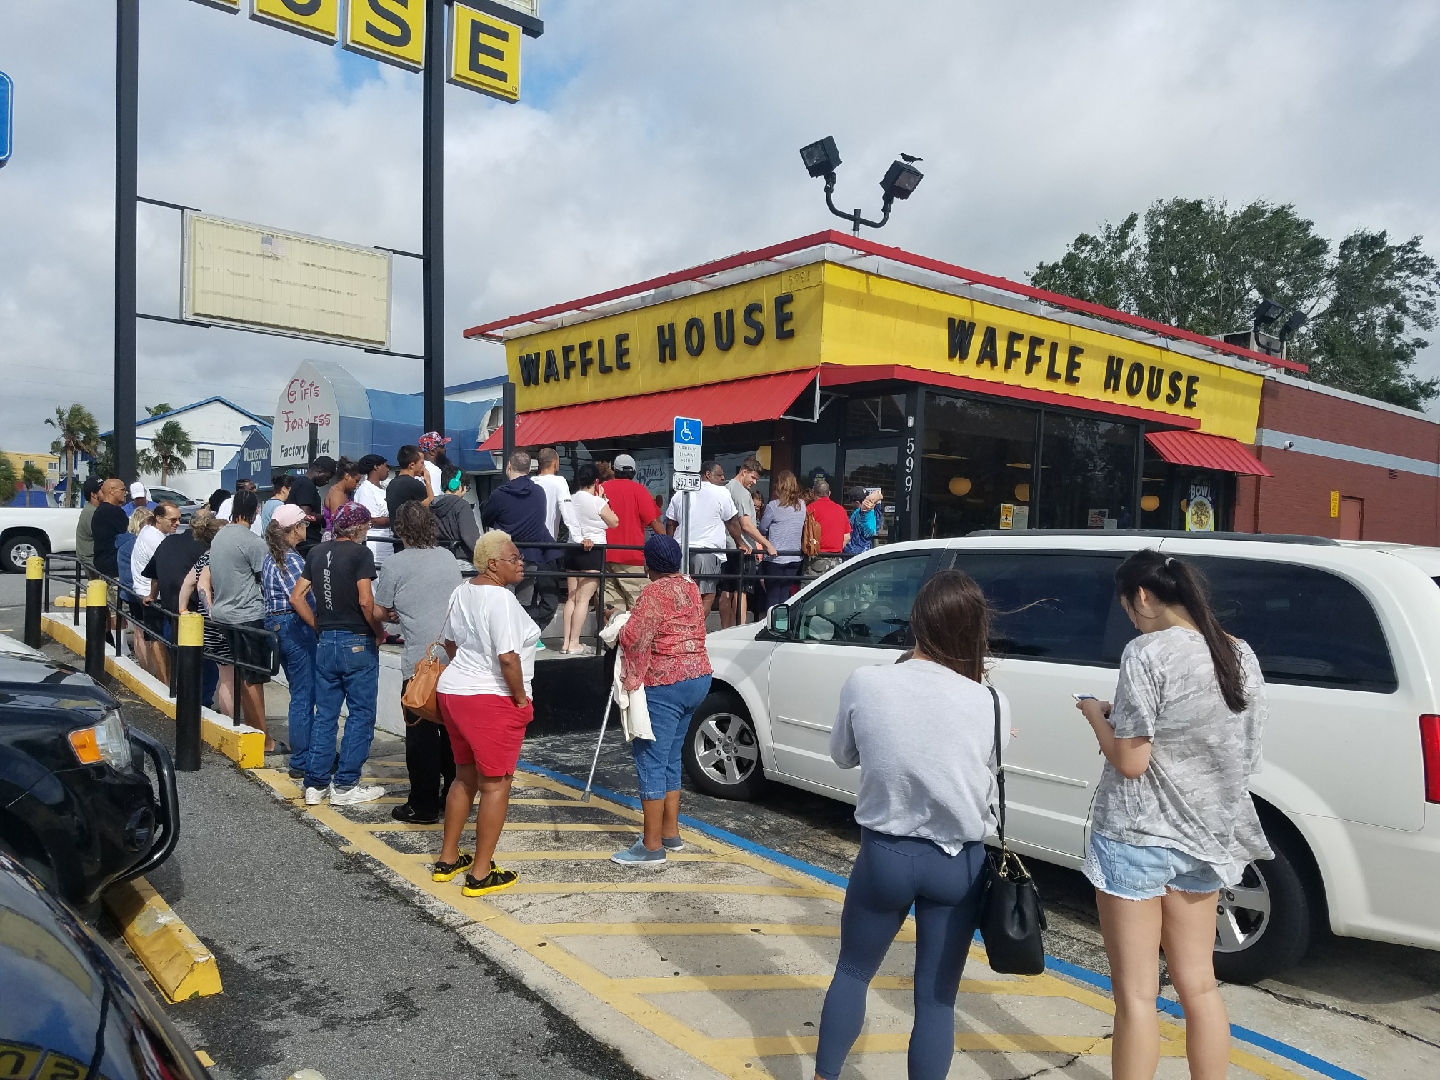 event at Waffle House restaurant